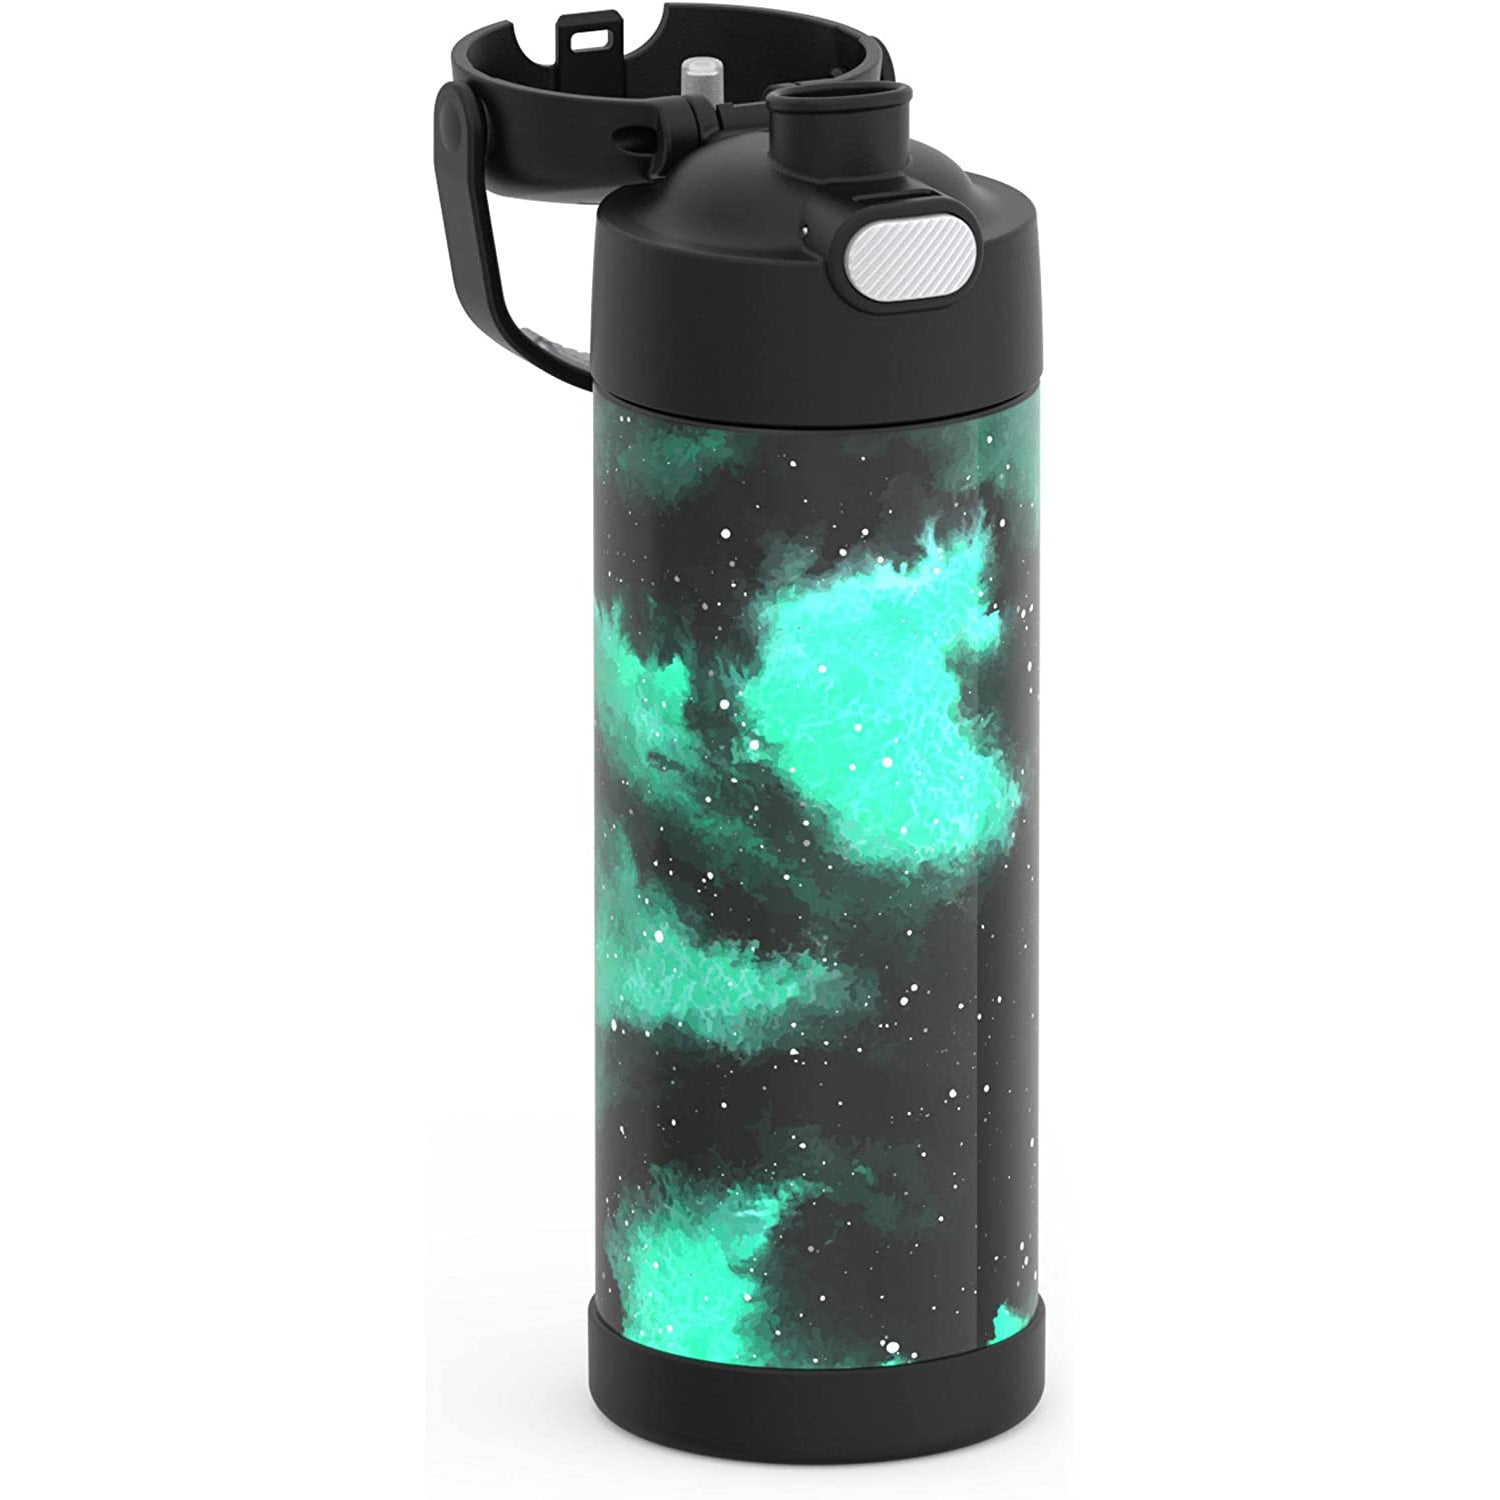 Thermos Funtainer Bottle with Spout Lid - Galaxy Green - 16 oz